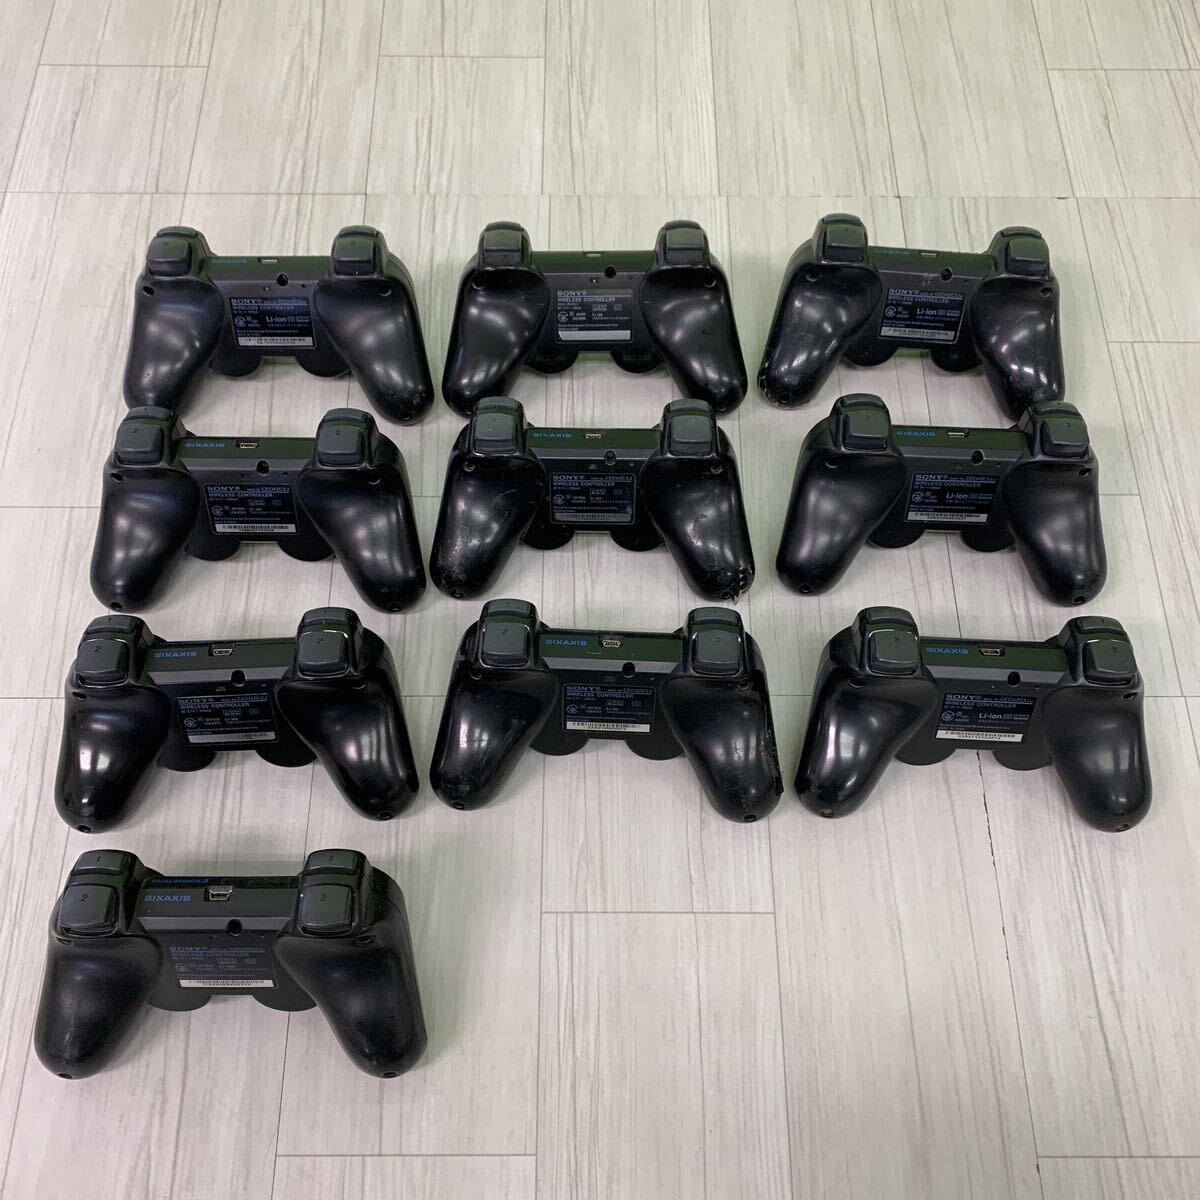  Junk SONY PS3 wireless controller genuine products 10 piece DUAL SHOCK 3